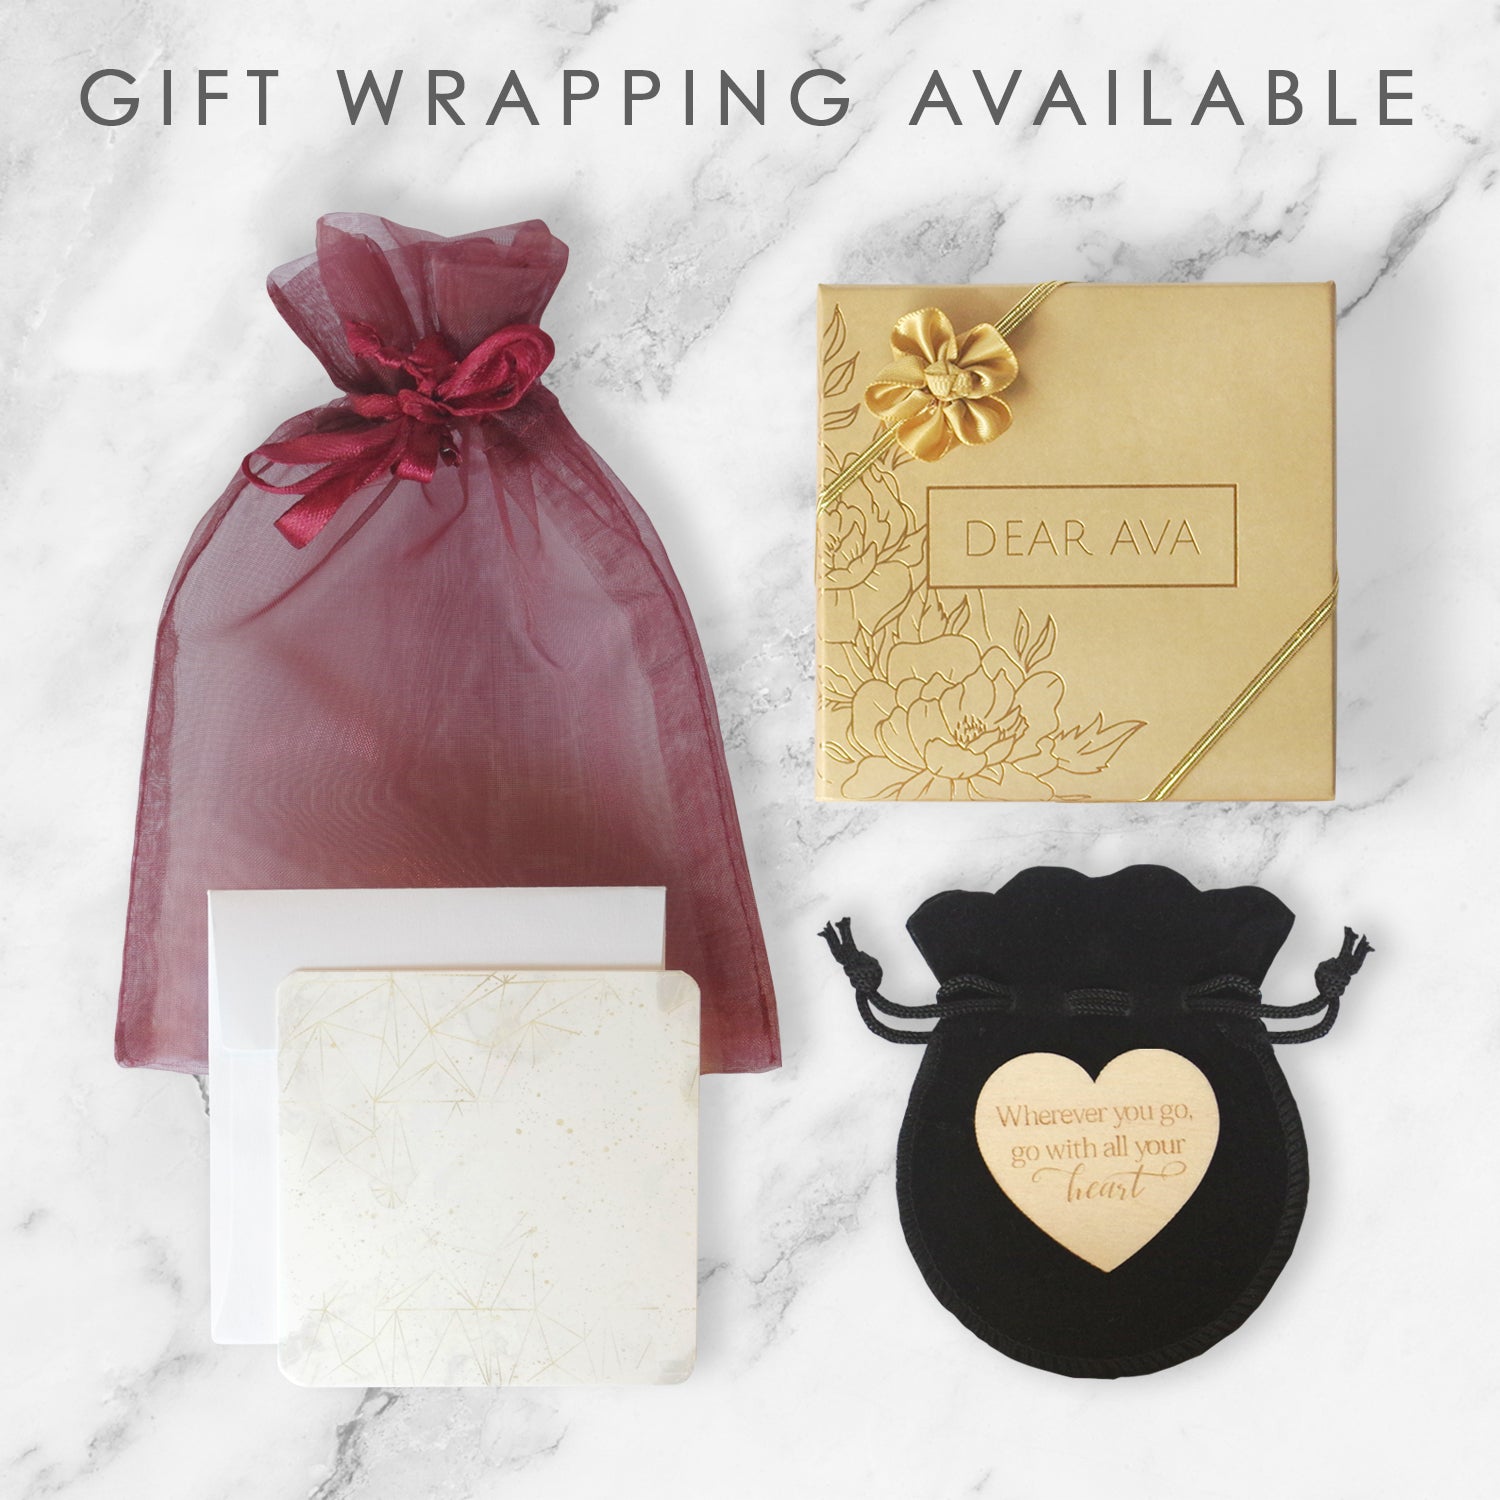 Zestard Gift Wrap - Surprise your loved ones with a heartfelt note